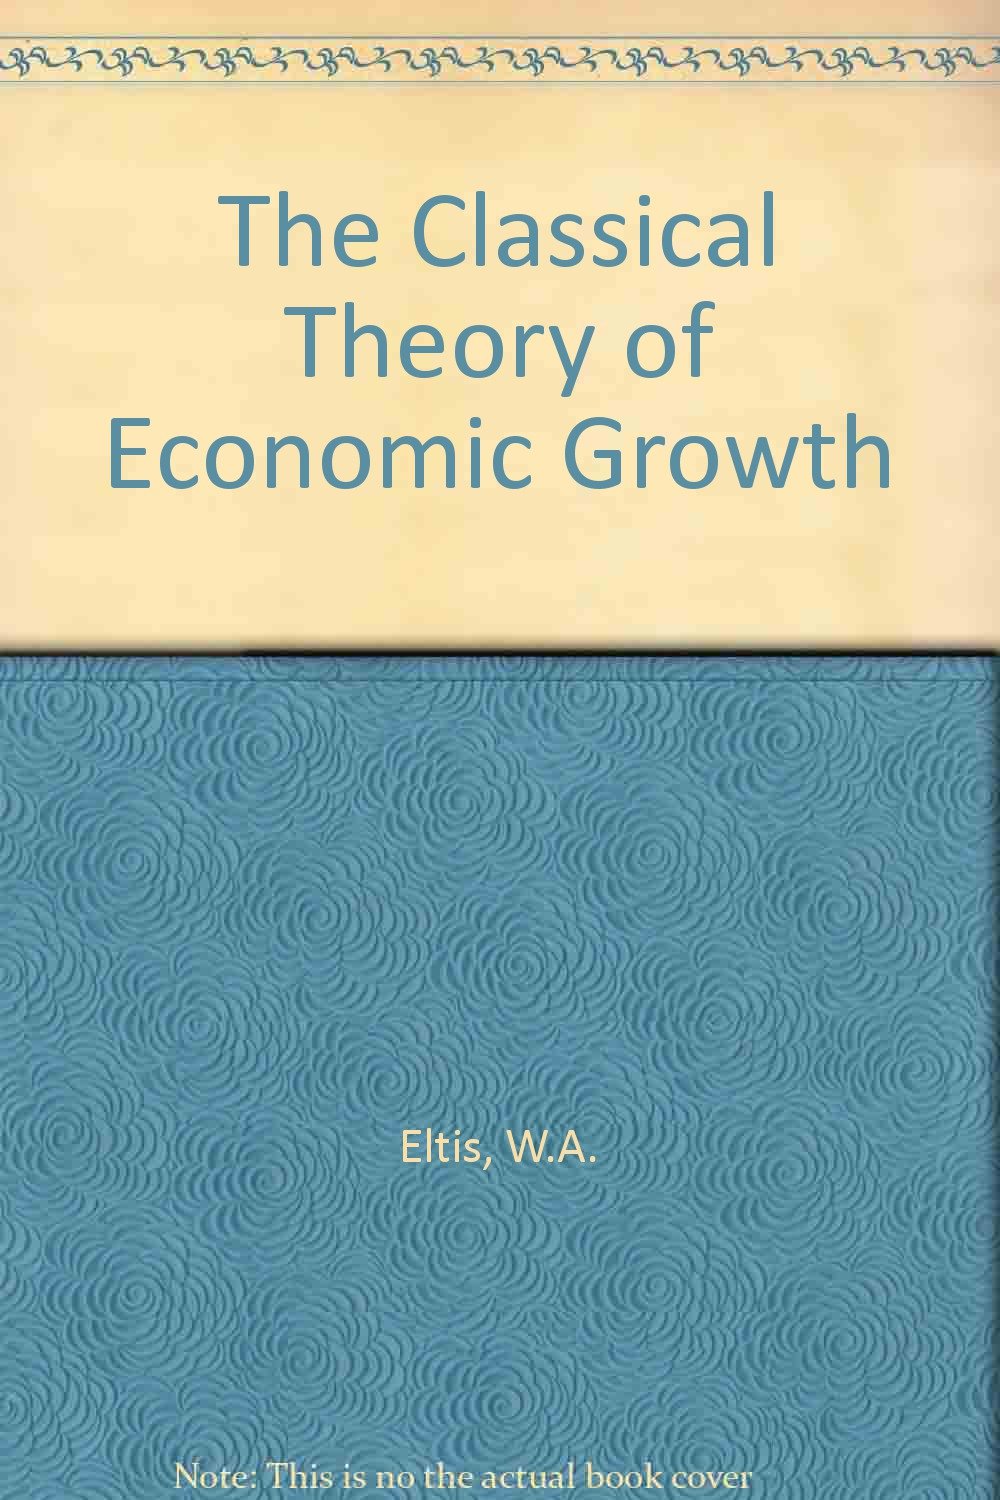 The classical theory of economic growth magazine reviews